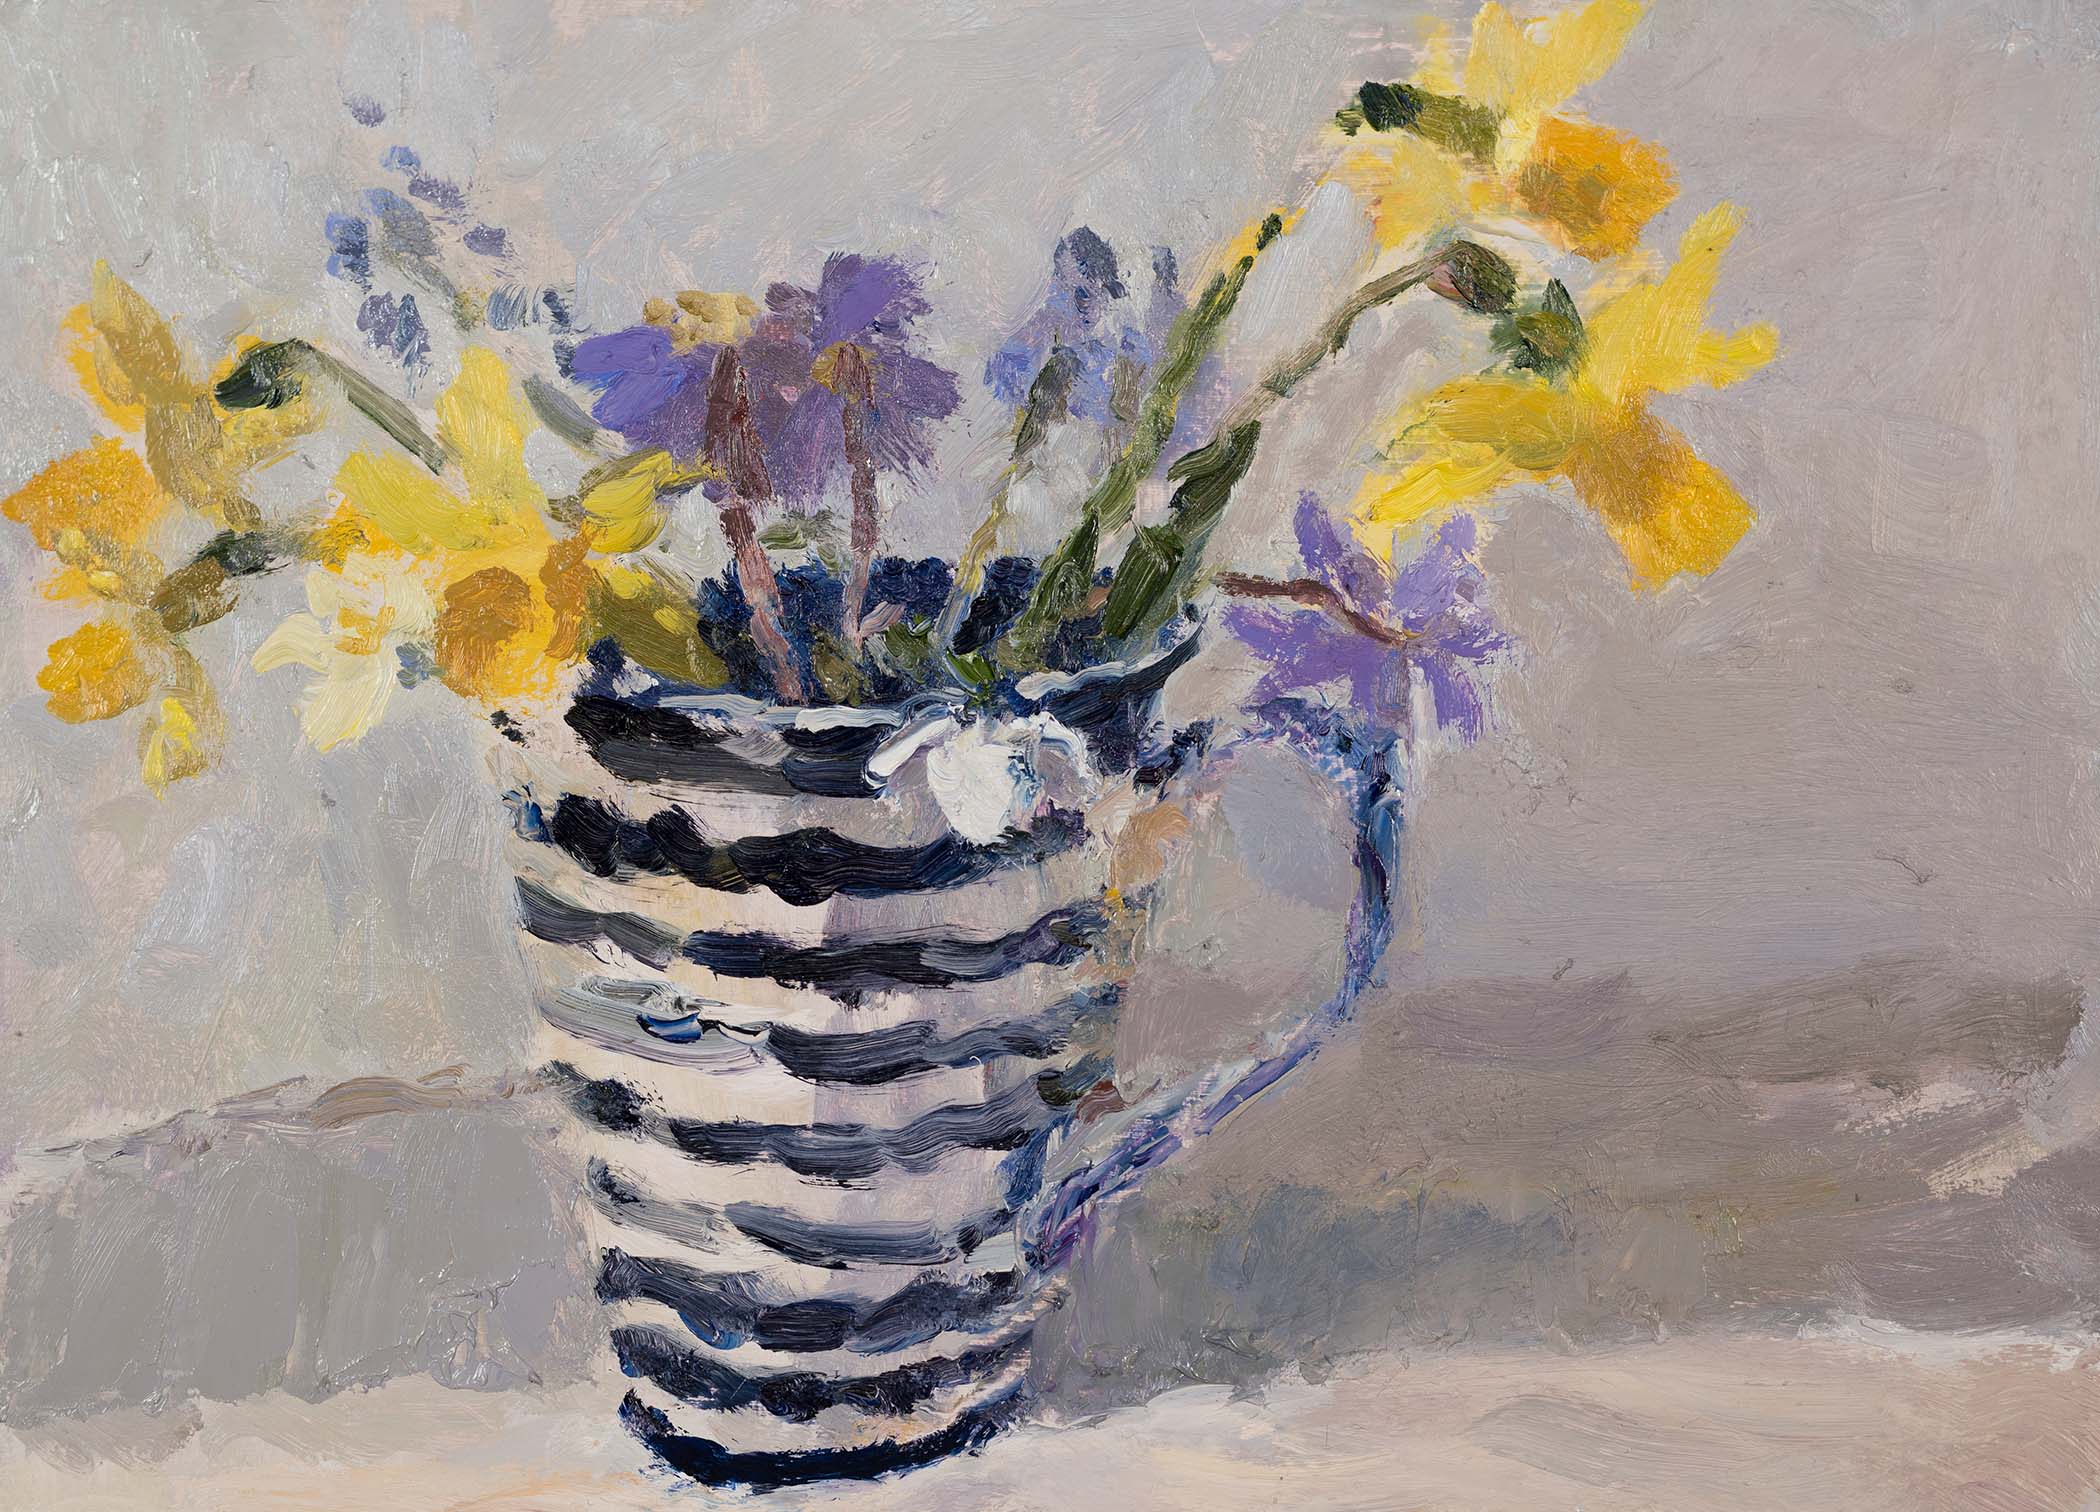 Snowdrop with Spring Flowers in a Striped Mug